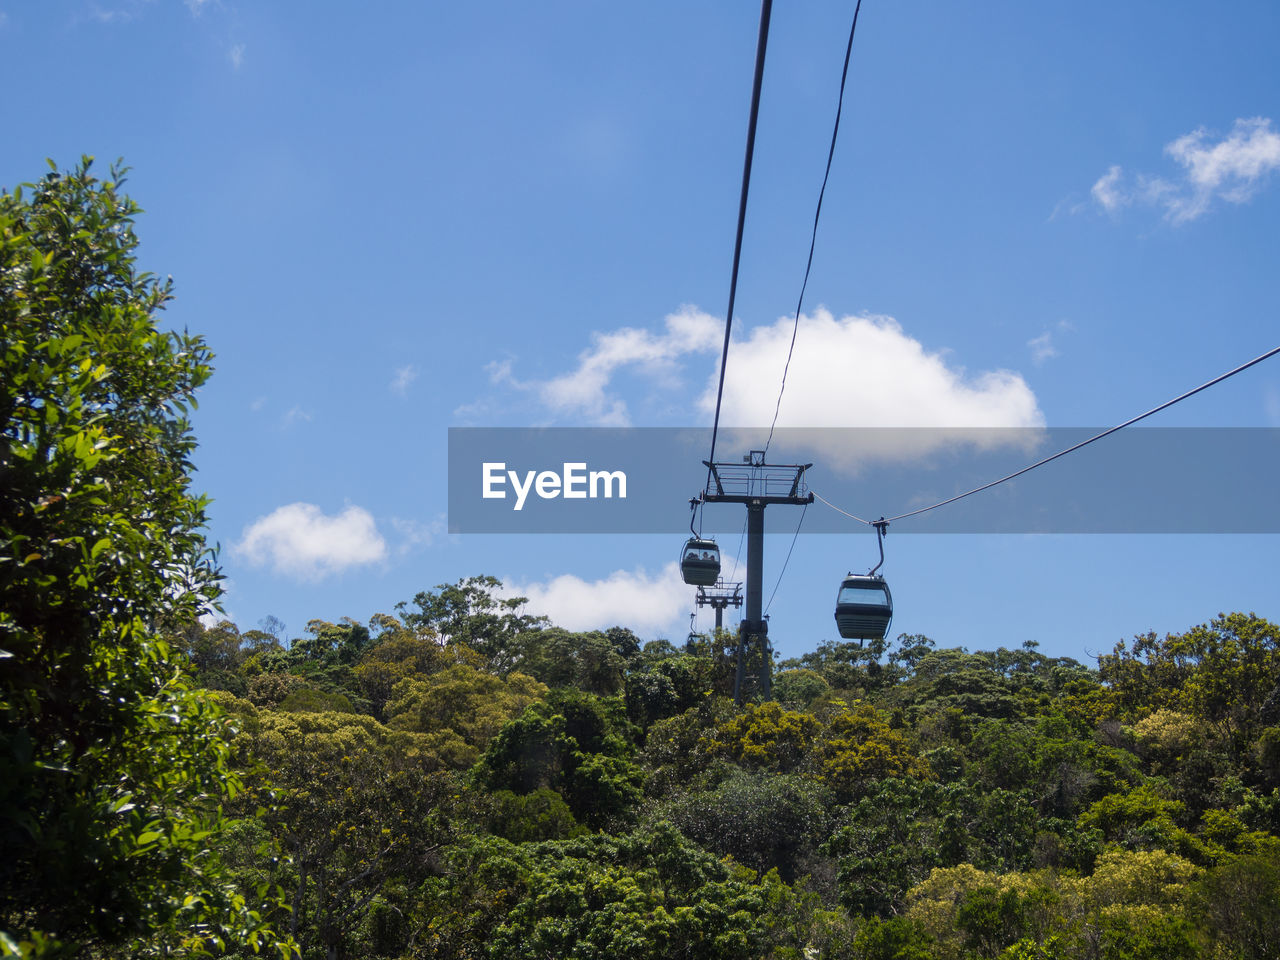 Overhead cable cars below lush foliage